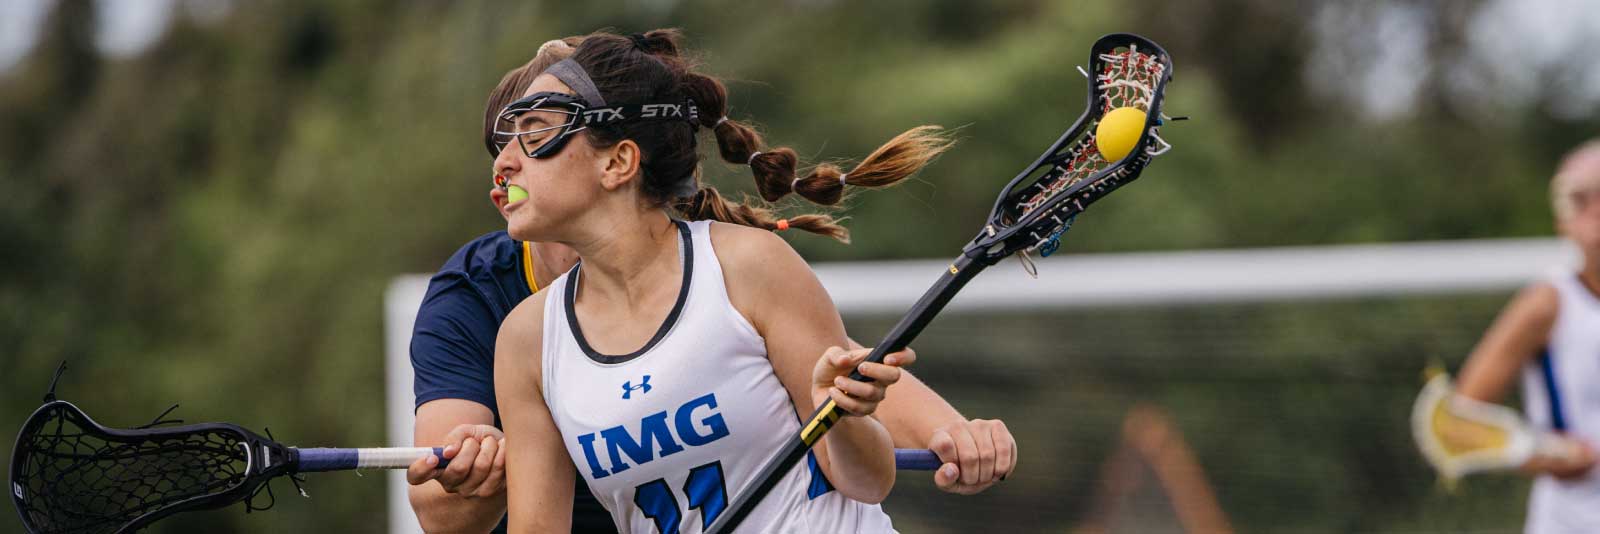 Women’s Lacrosse Recruiting Guidelines: What Coaches Look for in Lacrosse Players